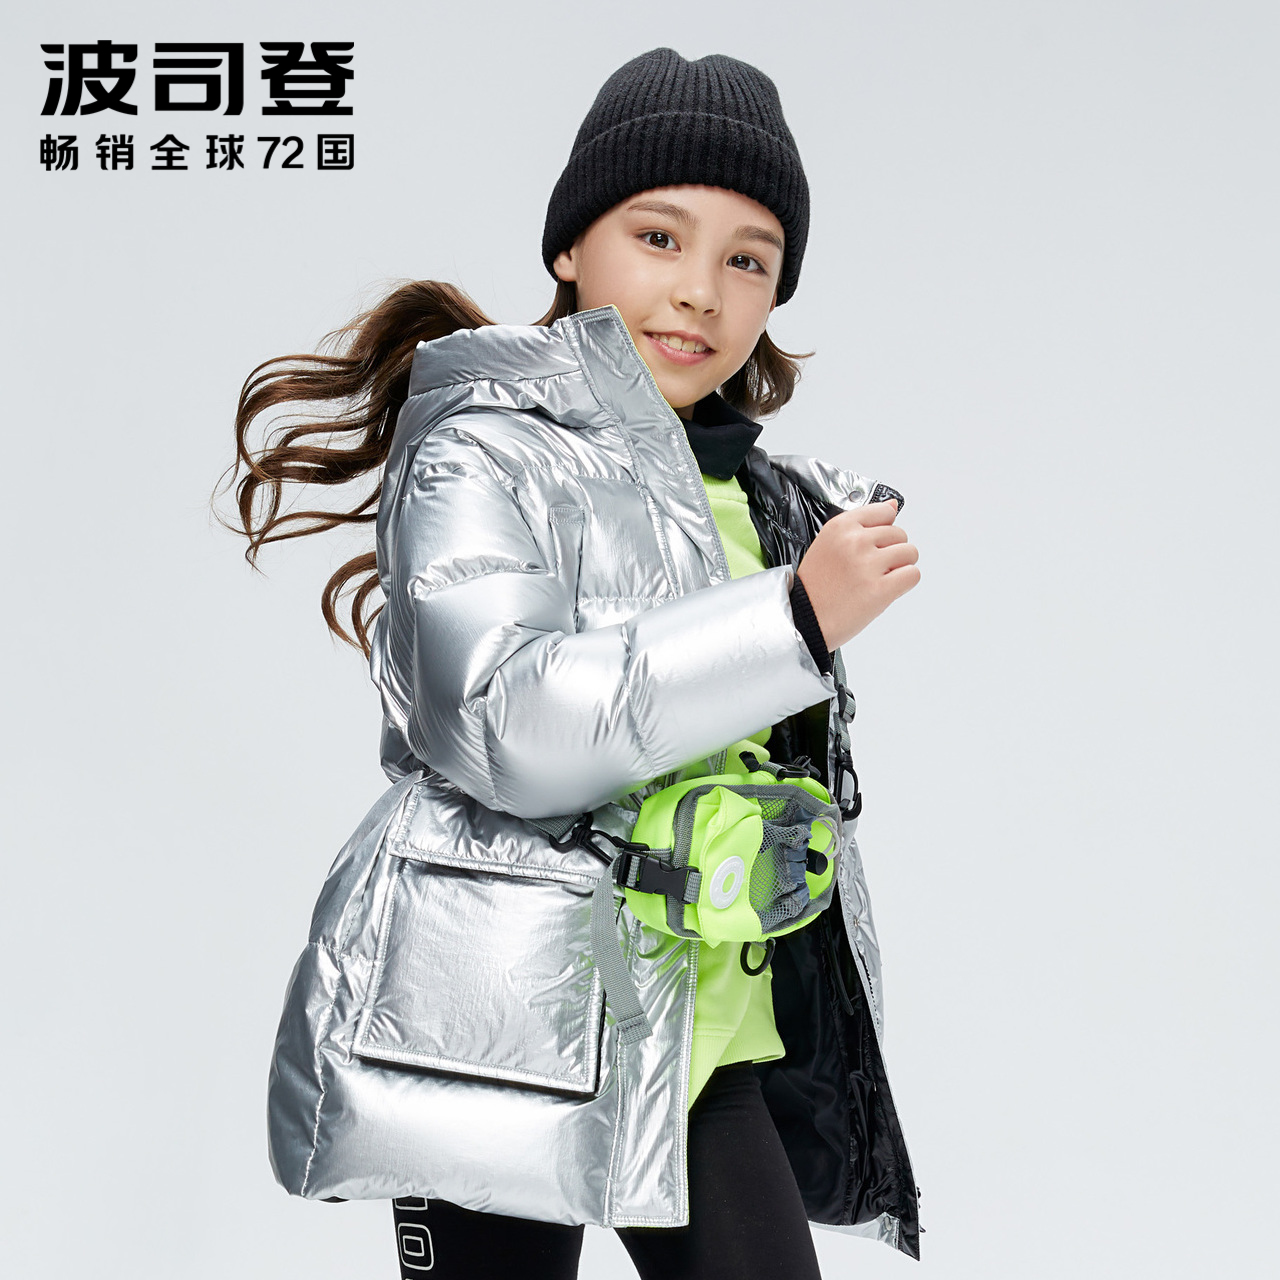 (Not on the shelves) Bosideng children's fashion puffs waist casual windproof warmth antibacterial super cool down jacket